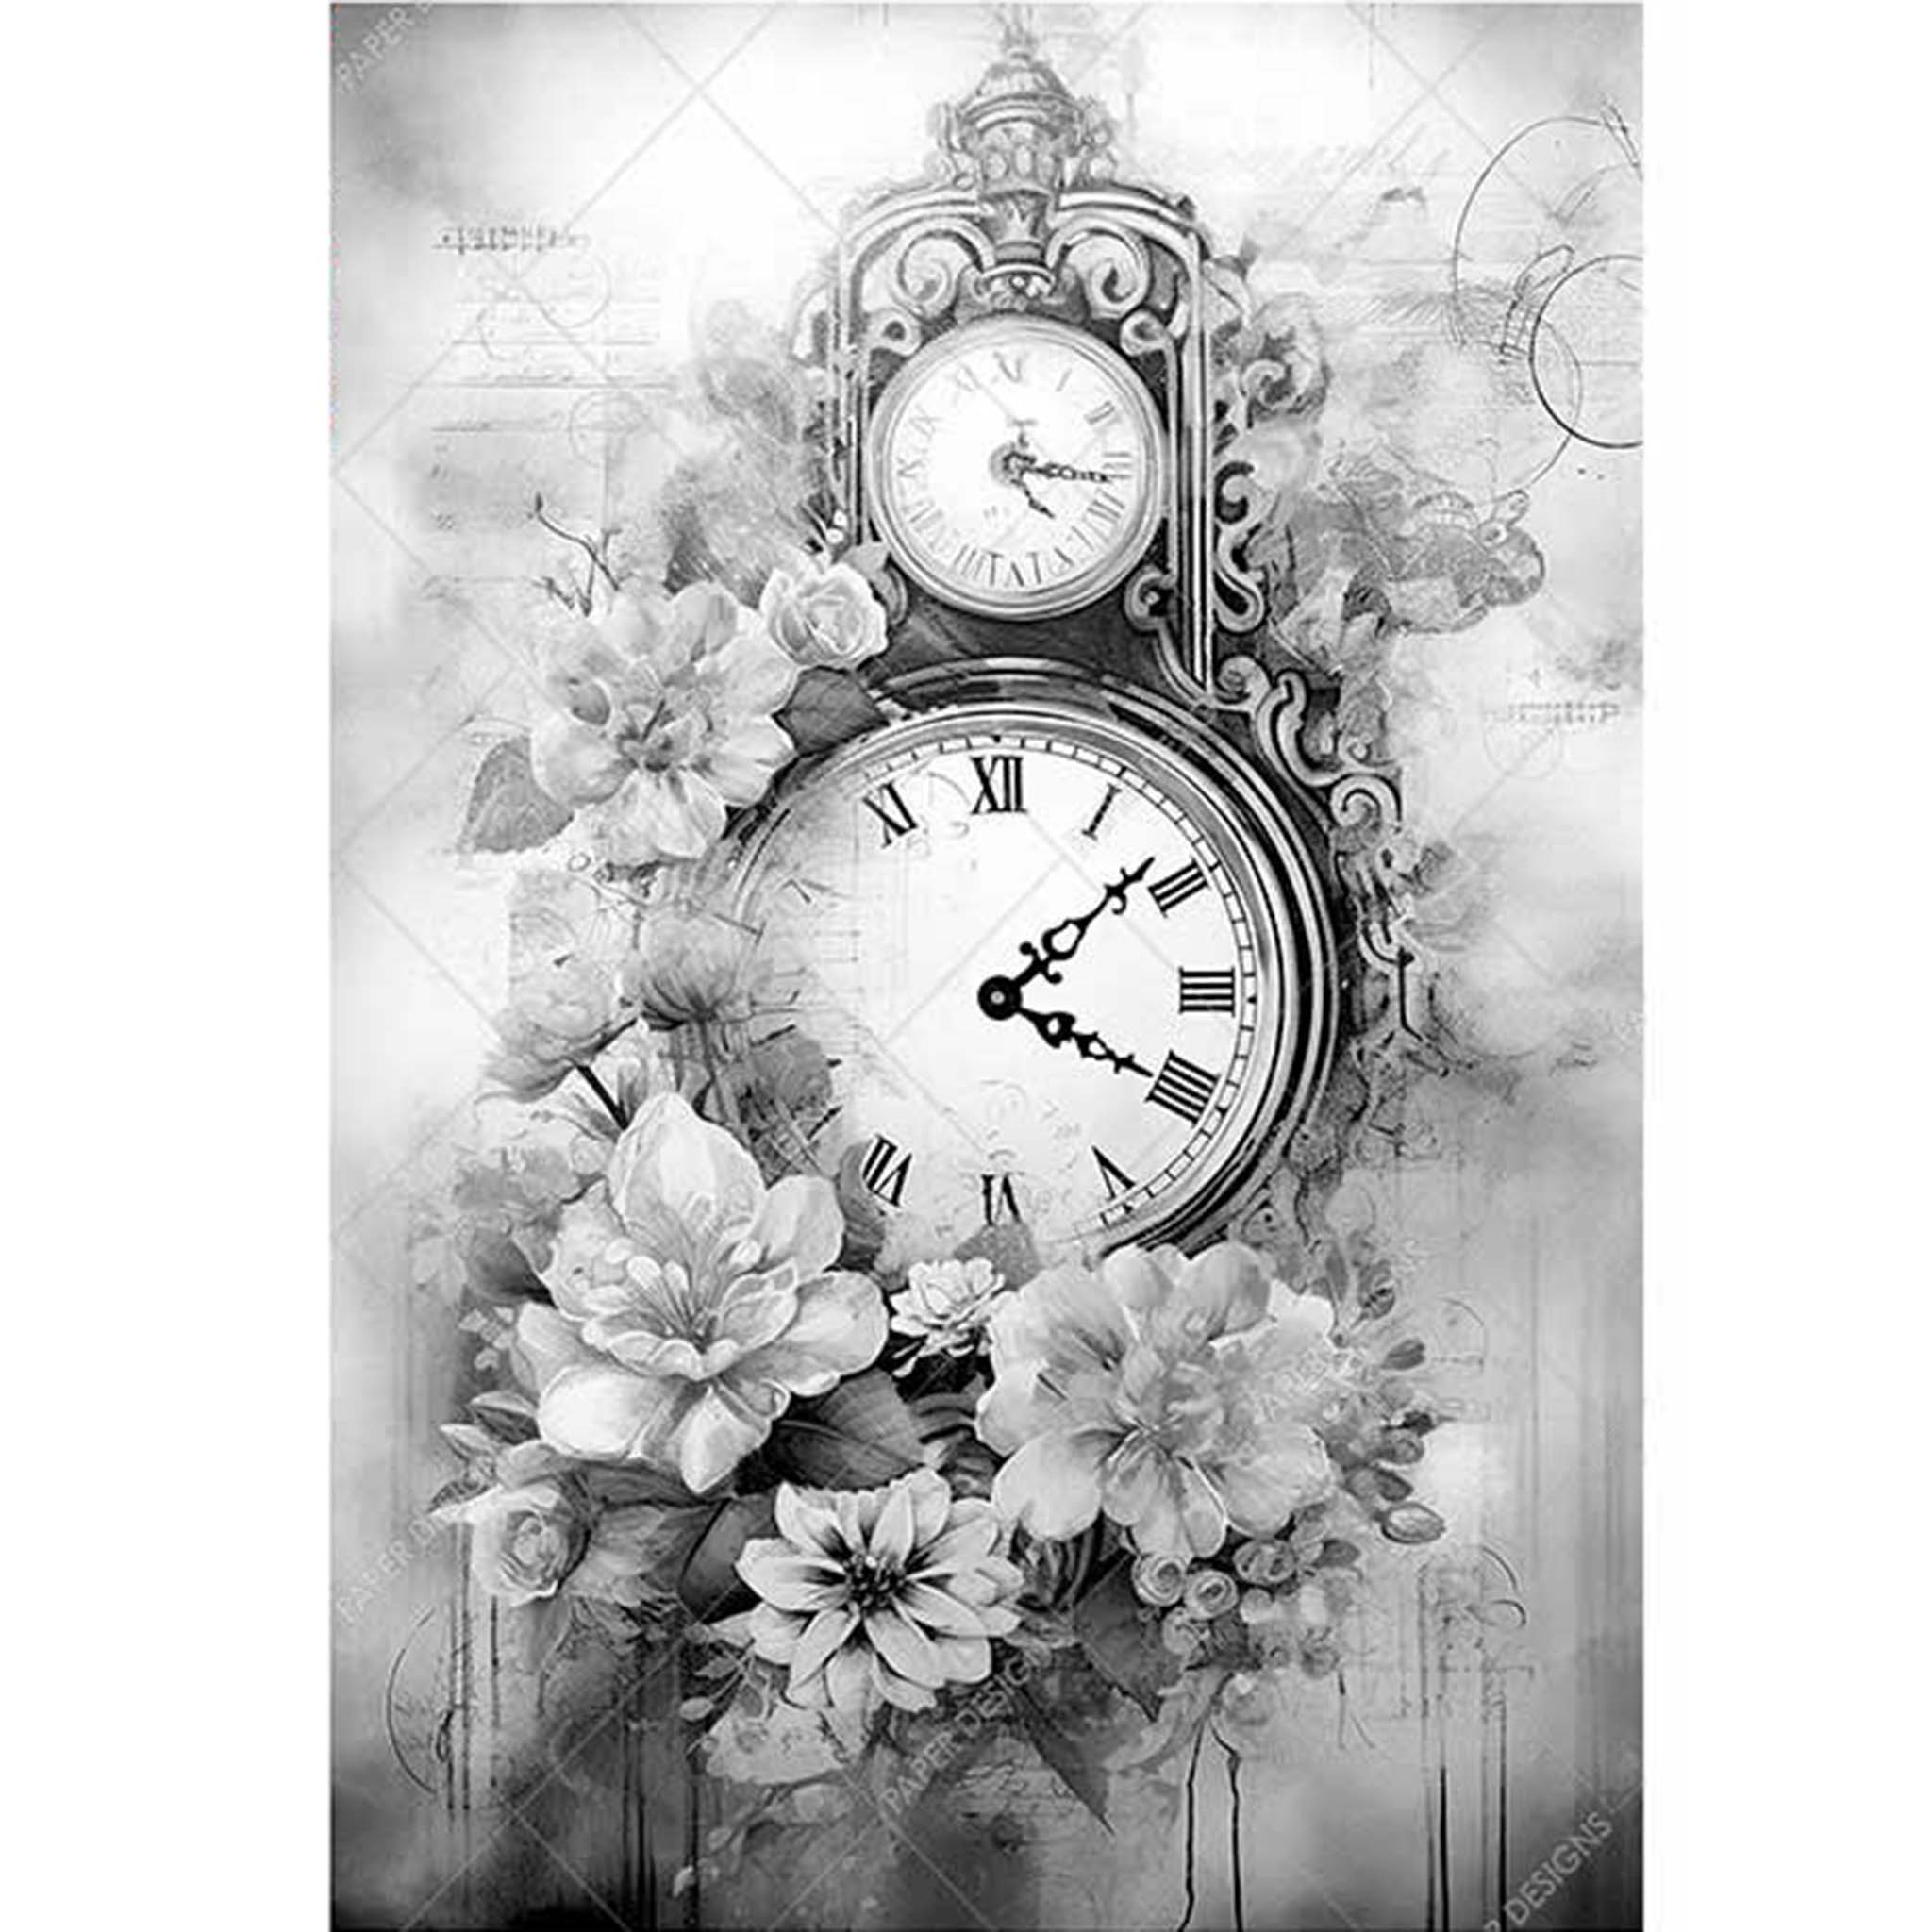 A3 rice paper design featuring a black and white image of an ornate clock surrounded by delicate flowers. White borders are on the sides.